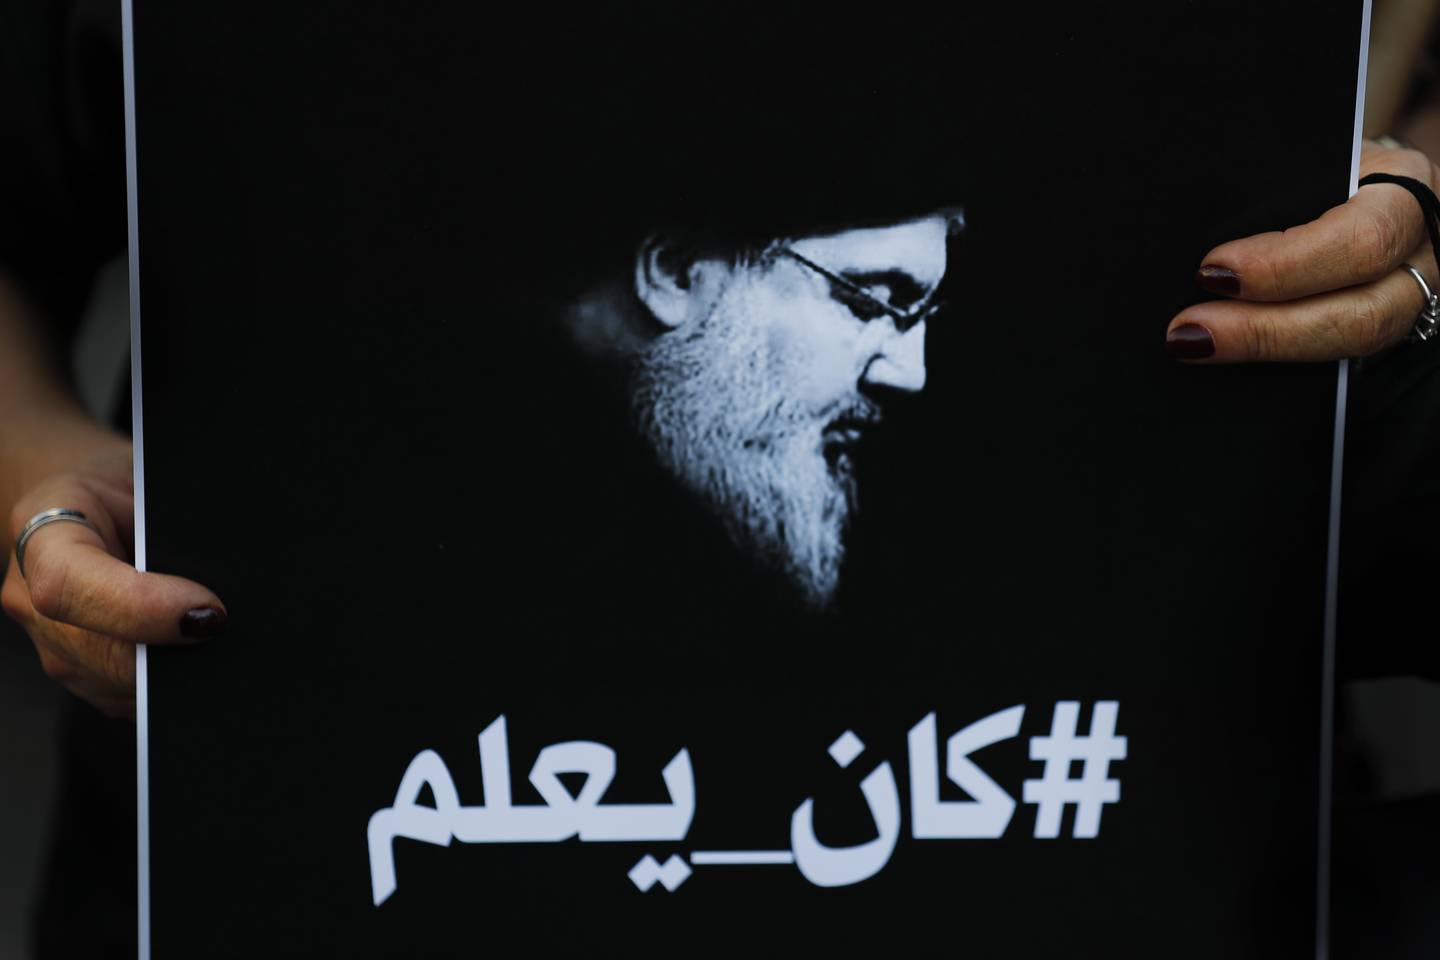 A Lebanese protester holds a portrait of Hezbollah leader Hassan Nasrallah with Arabic that reads, "He knew," referring to the thousand tonnes of ammonium nitrates that exploded at Beirut seaport, during a protest against the Hezbollah group and the visit of the Iranian foreign minister, in Beirut, on October 6, 2021. AP